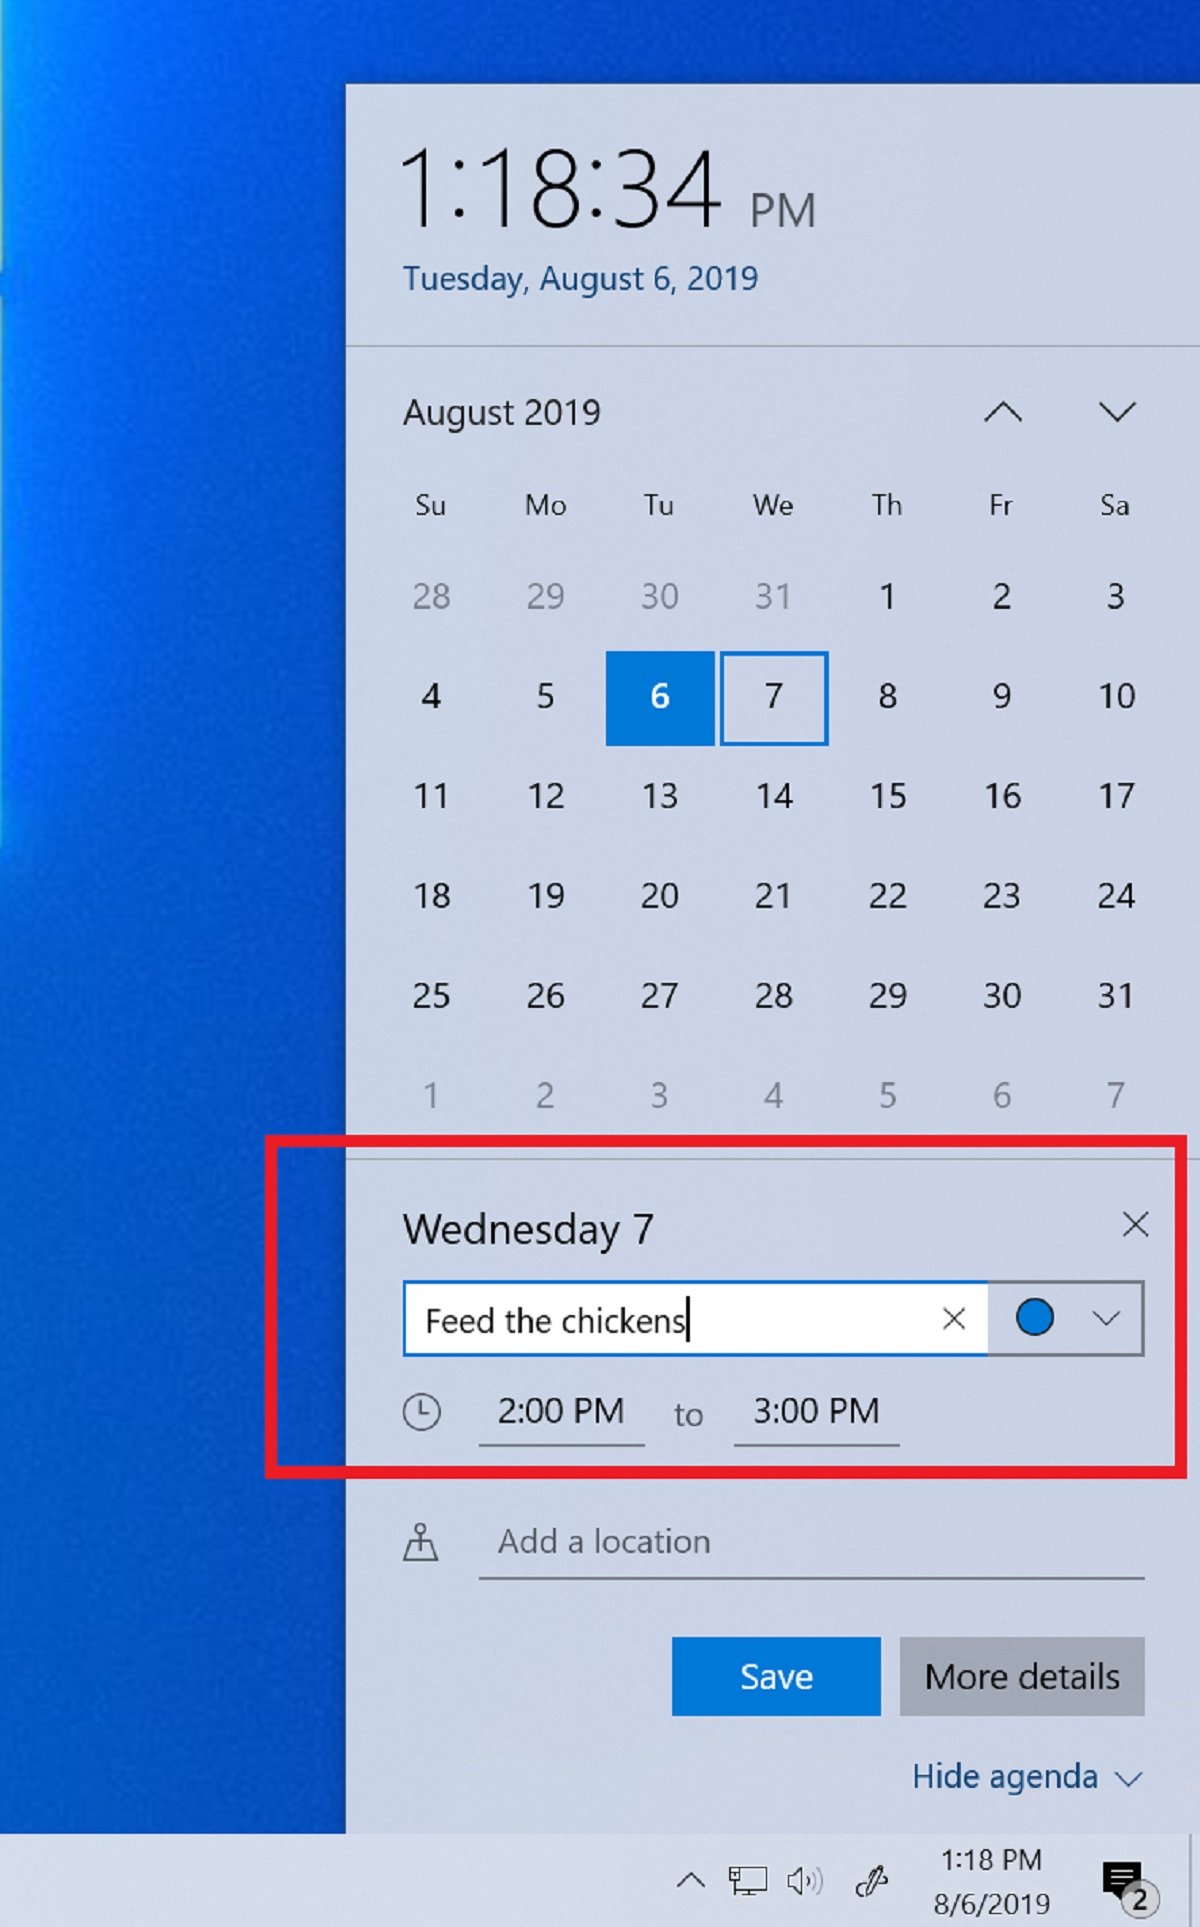 Windows 10 1909 will End of Life next week